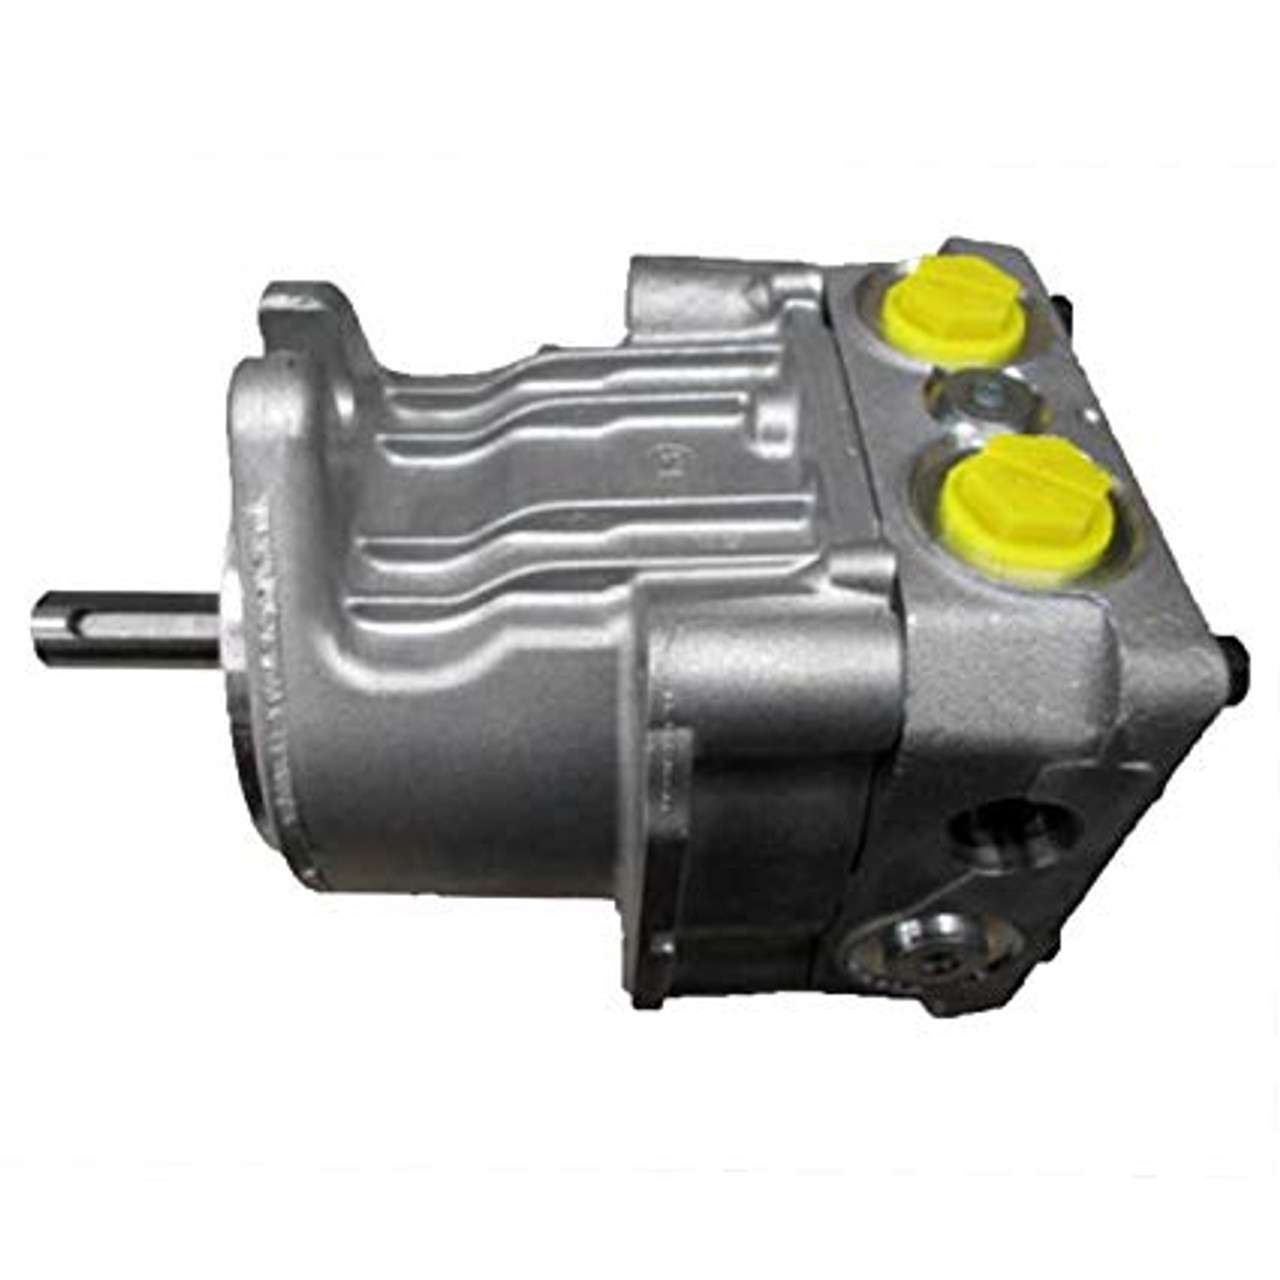 Hydro Gear Replacement Pump 10cc (Right) for Exmark Turf Tracer S & X Series & Others / 116-2495, PE-1JQQ-DY1X-XXXX